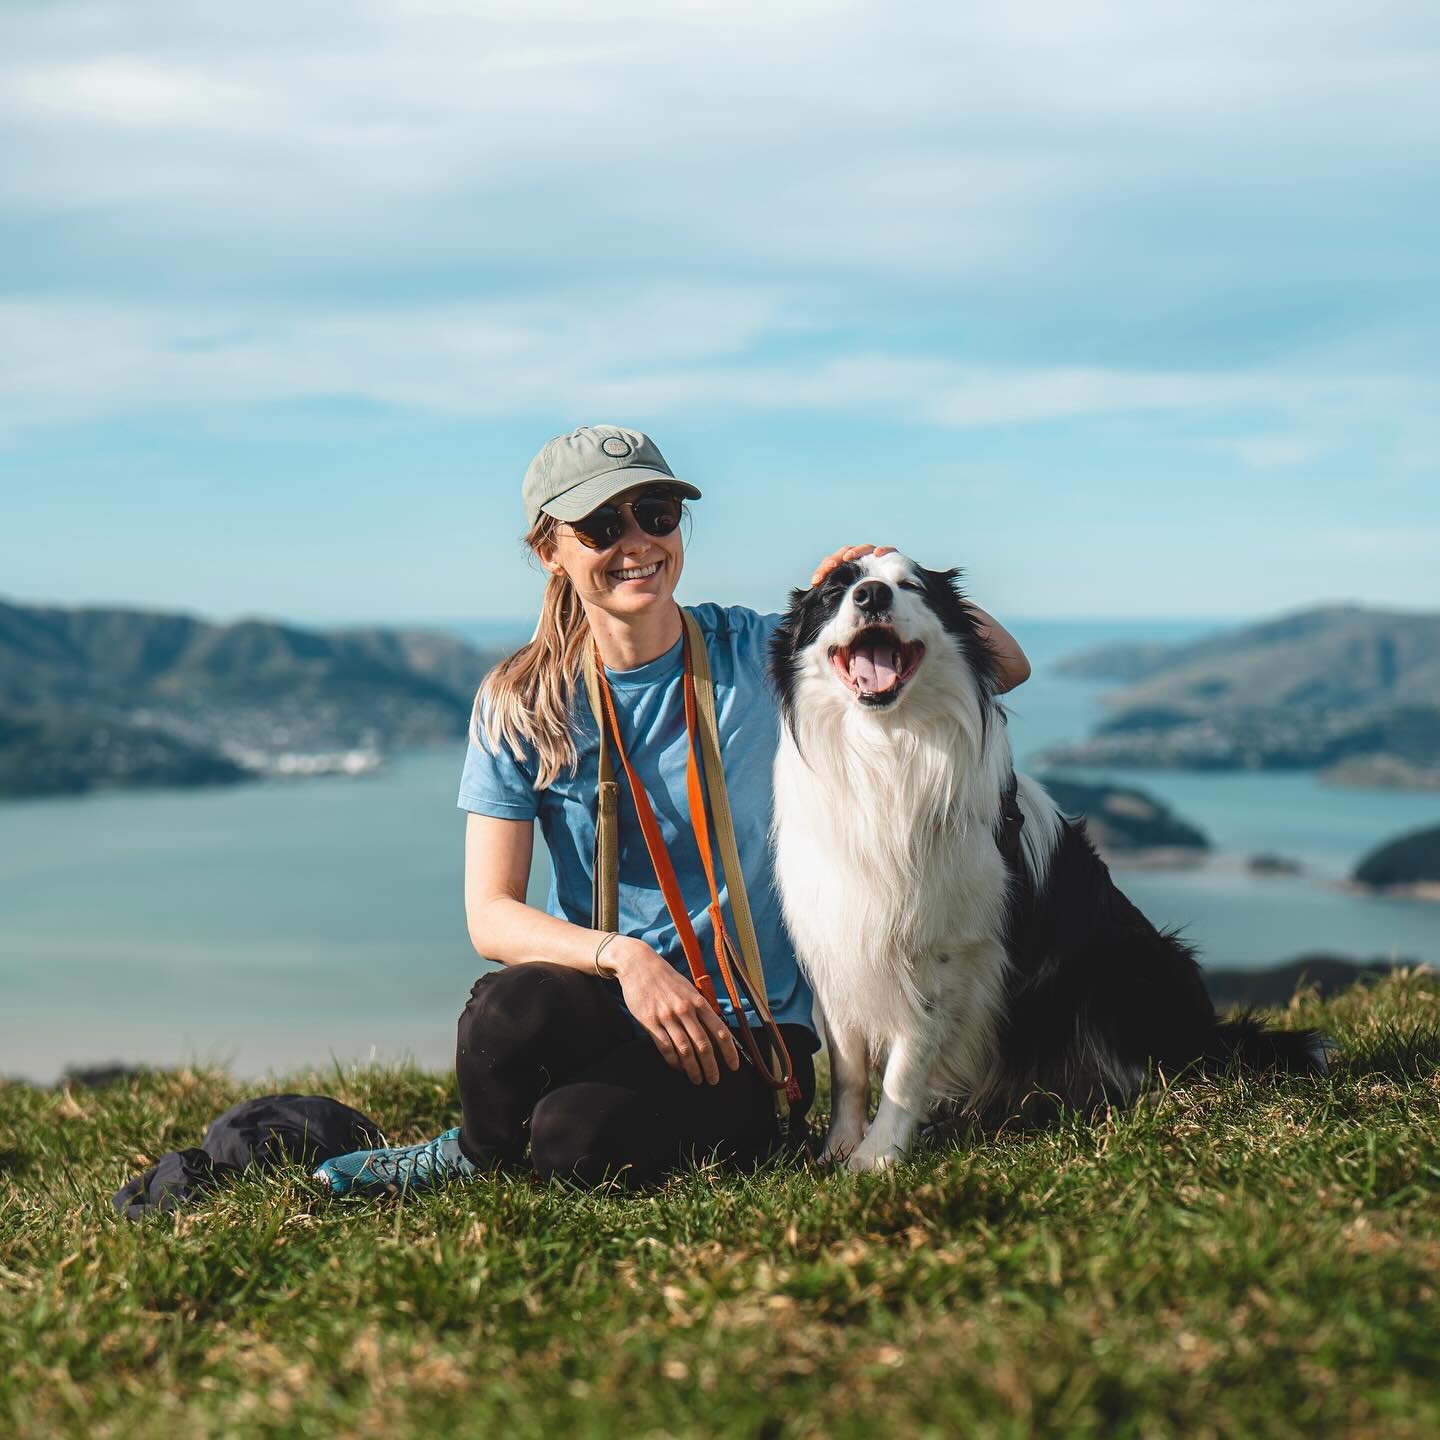 👋🏻 Hi, Claire here, the face behind Tailblazers! Here are some fun facts about me:

🌏 I&rsquo;m originally from Australia but fell in love with New Zealand during my travels in 2018 and immediately knew it was where I wanted to call home.

🏩 My p